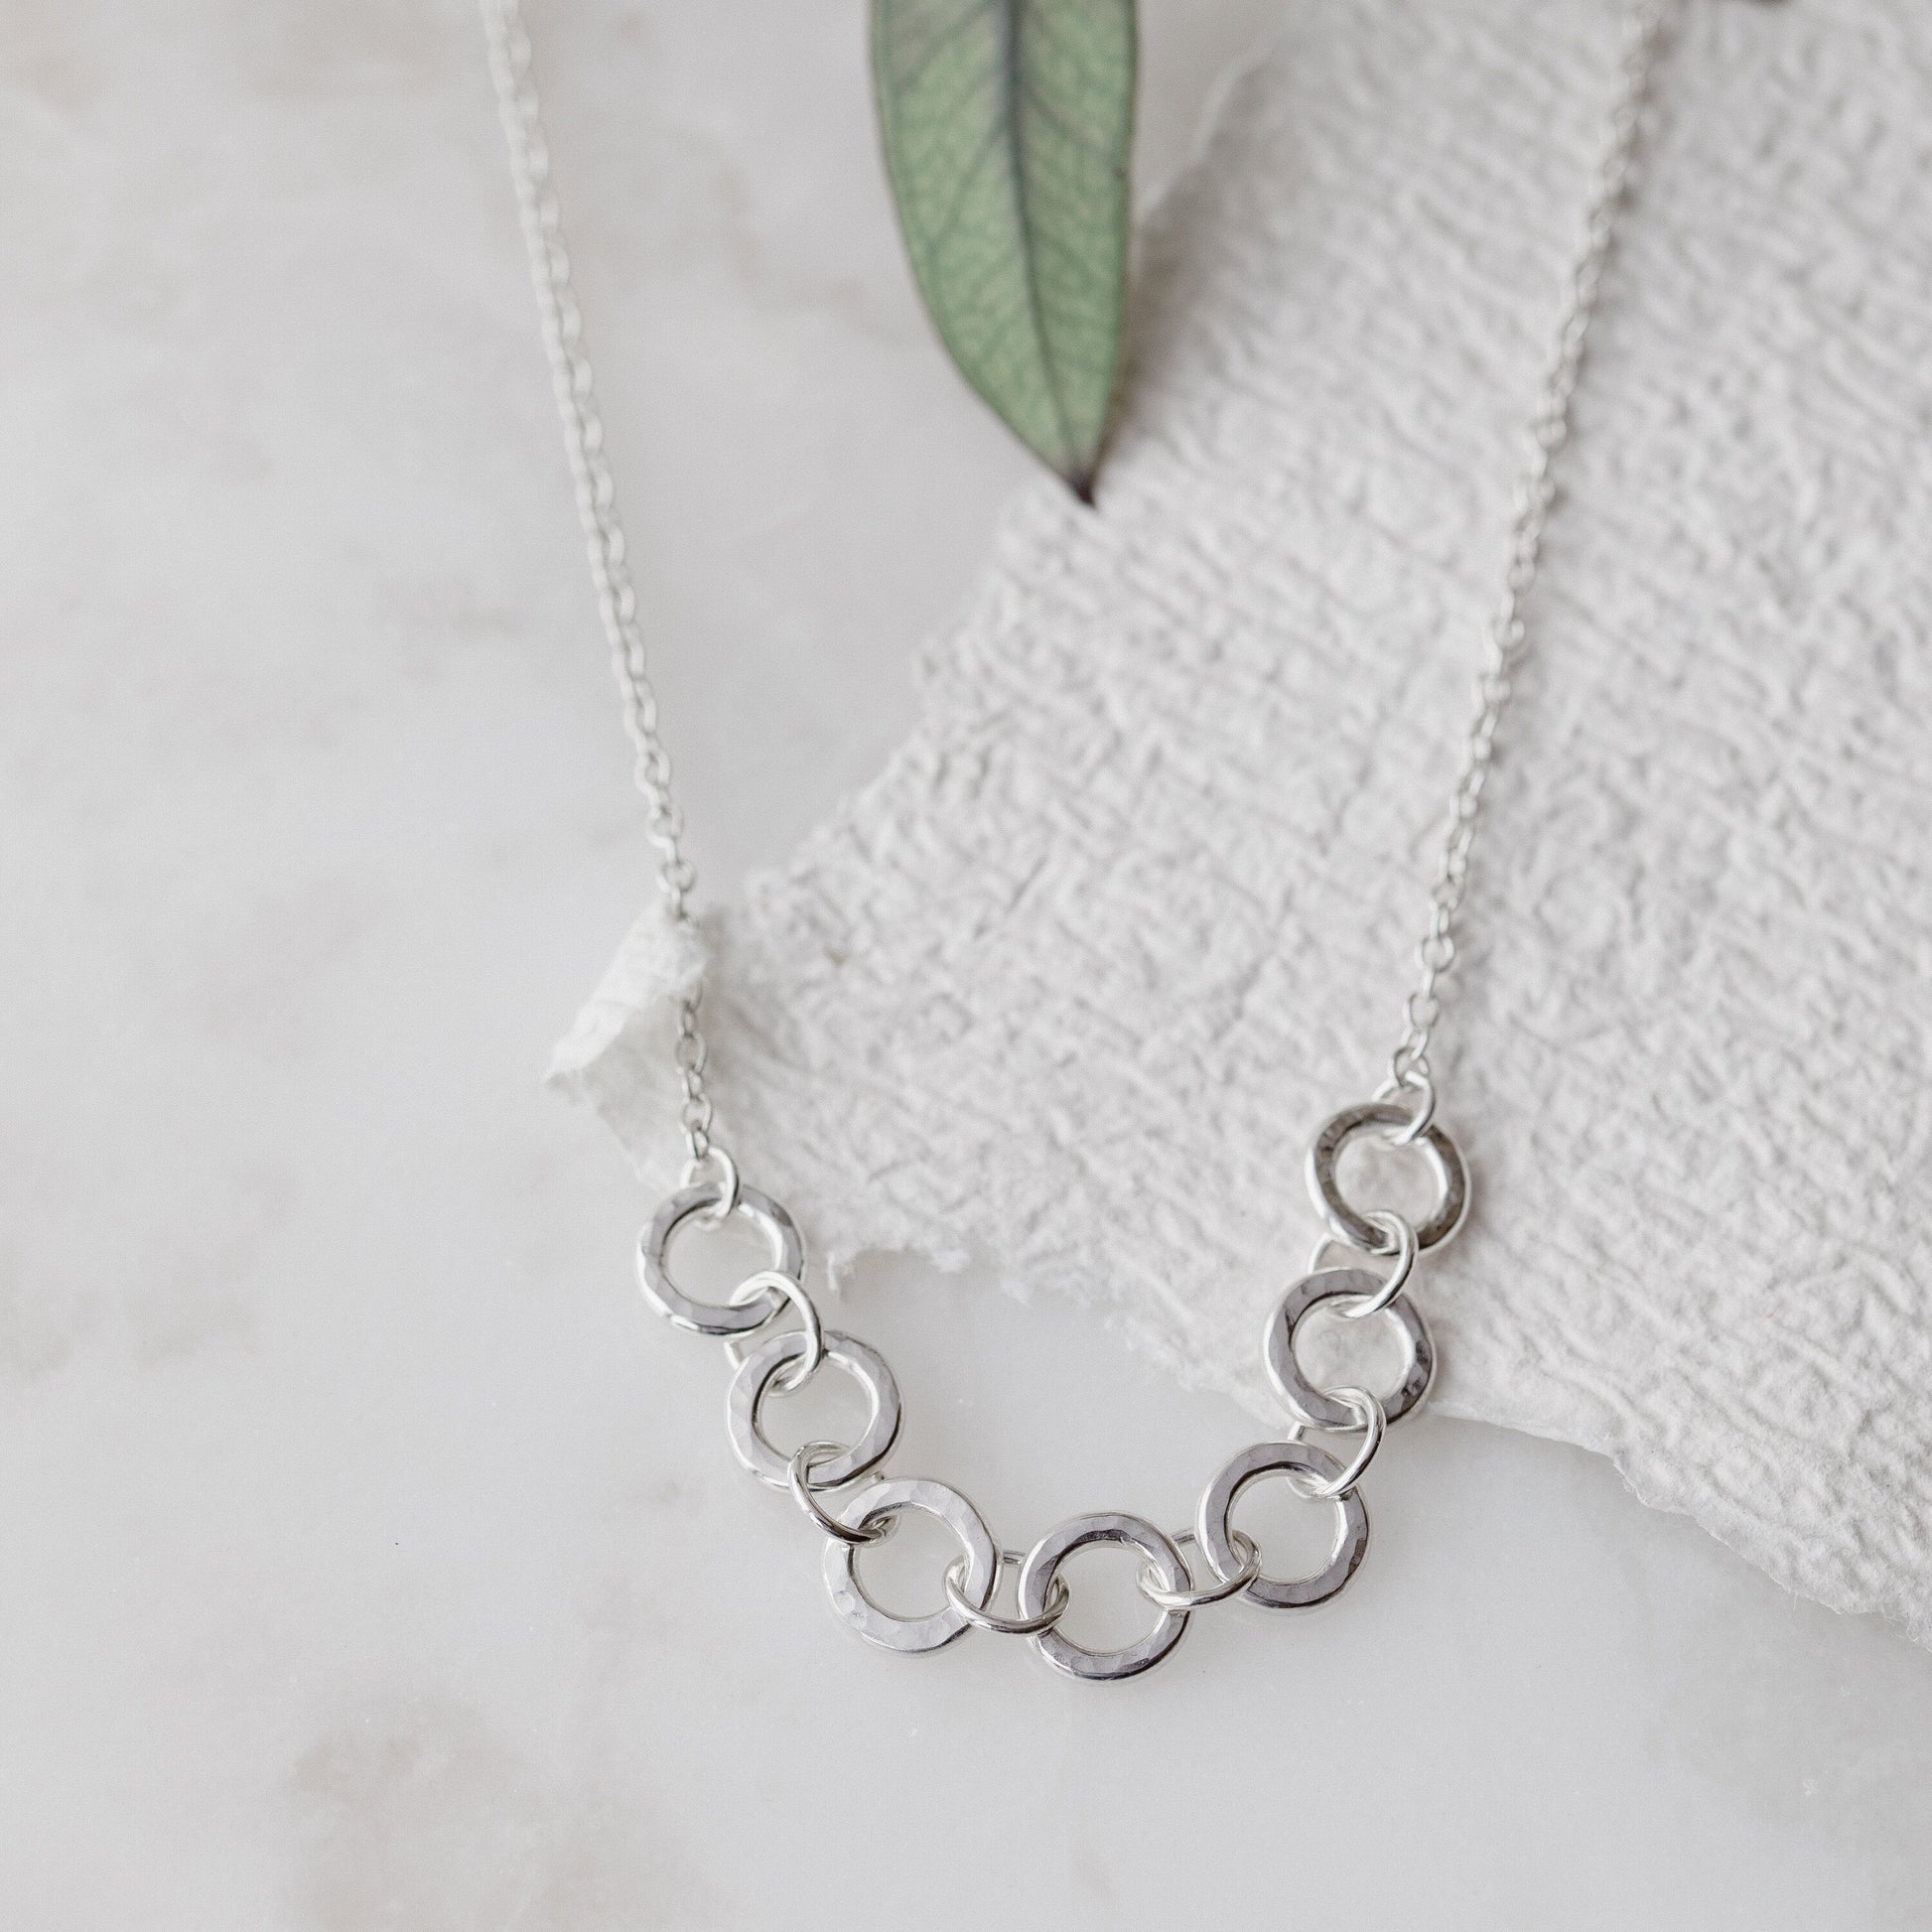 Handmade Silver Affinity Necklace with Eco Silver Anna Calvert Jewellery 